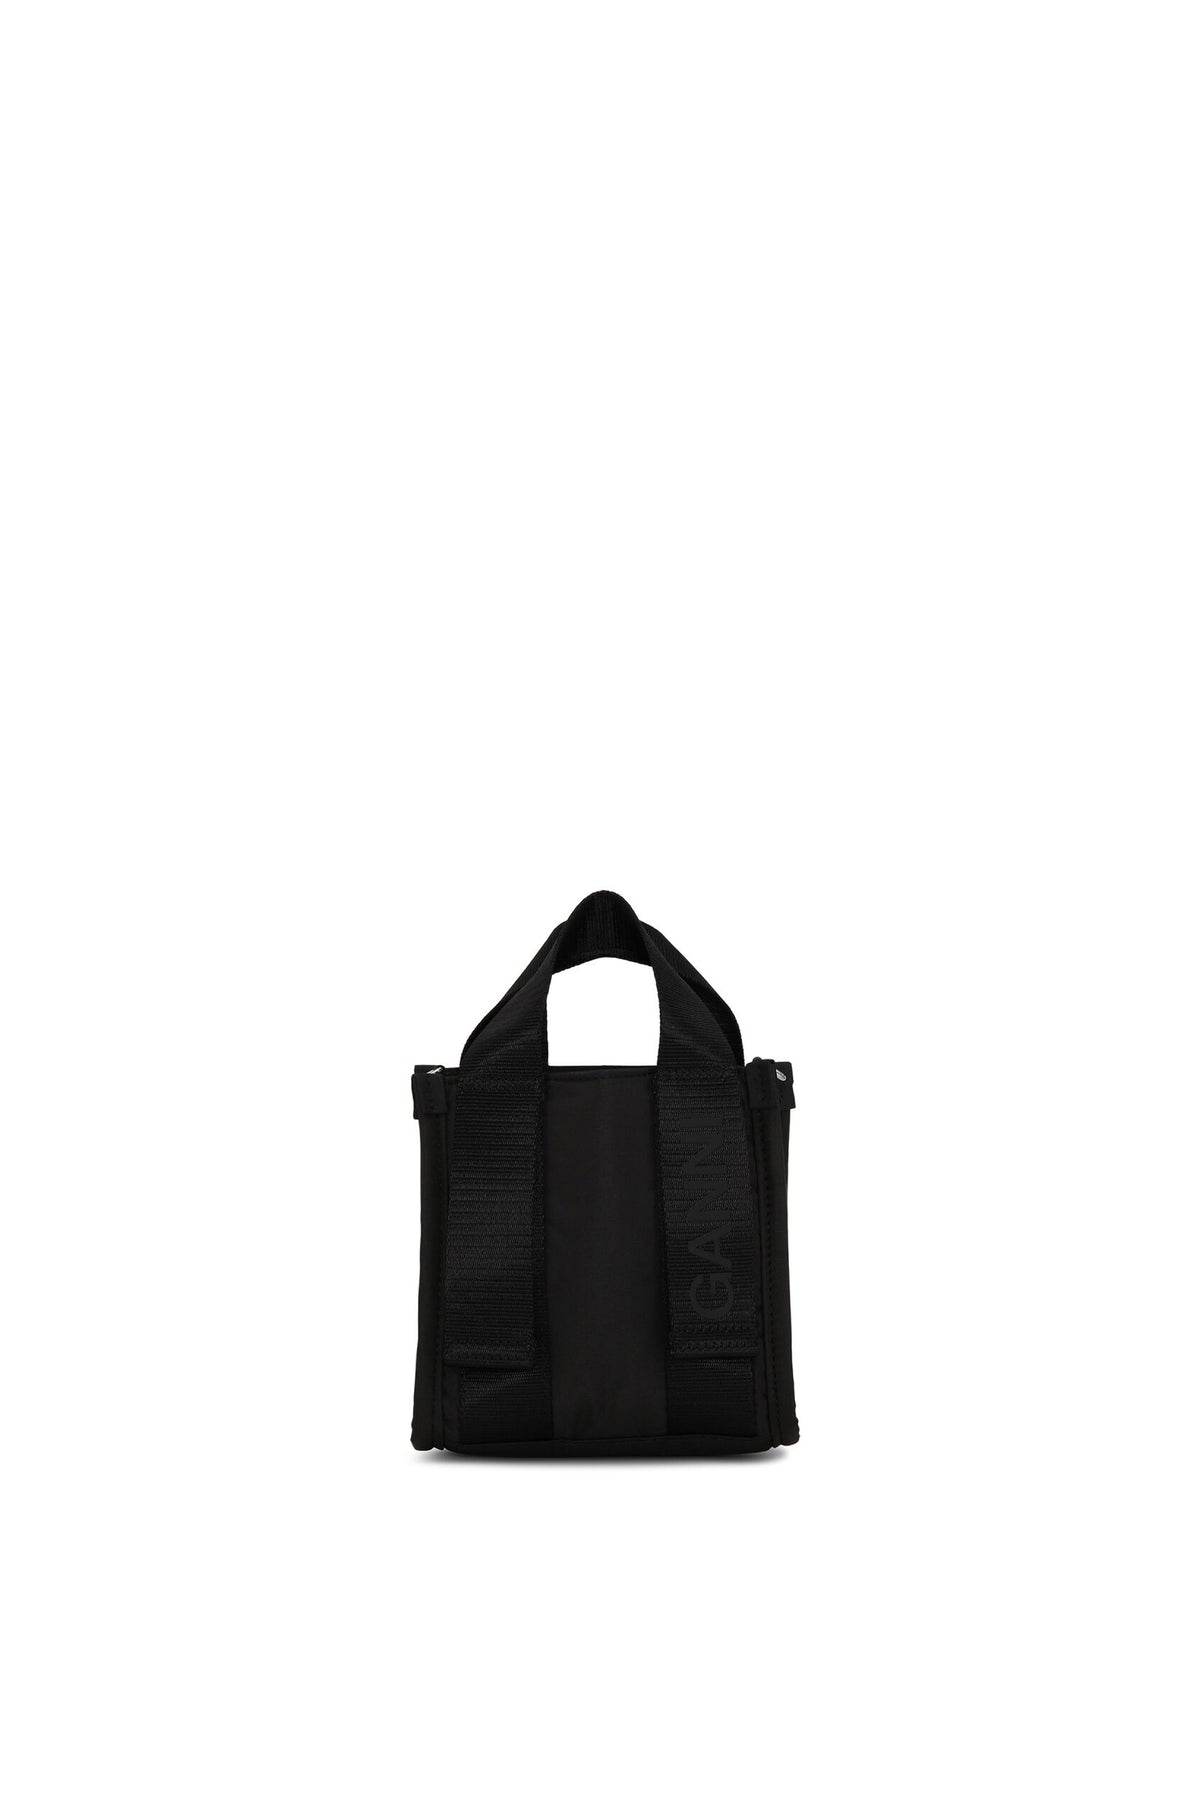 RECYCLED TECH MINI TOTE / BLK